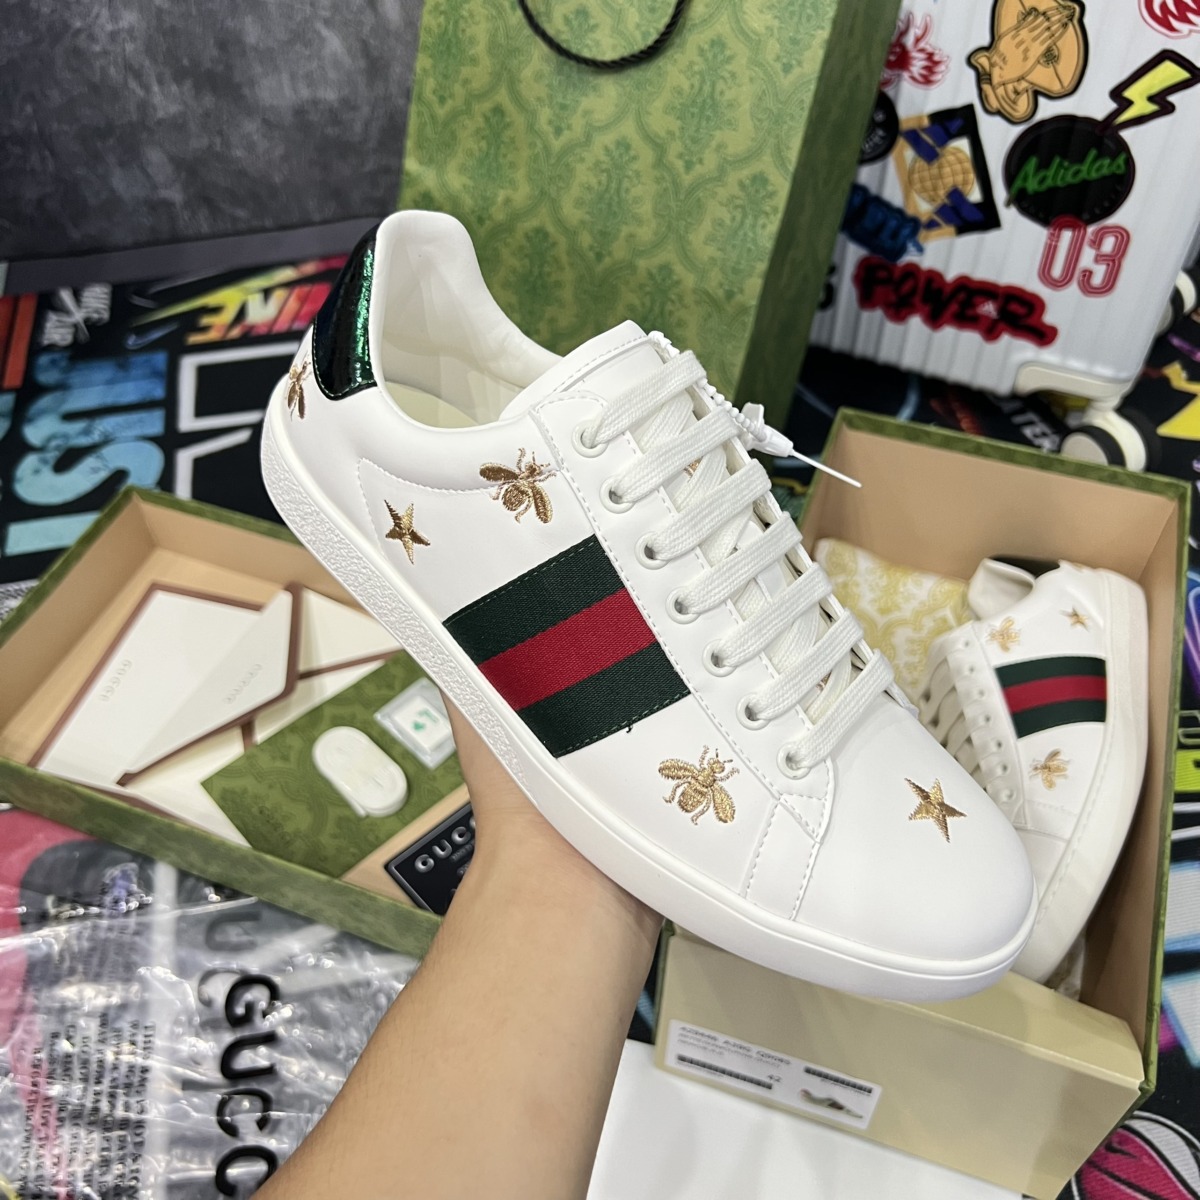 Giày Gucci Ace Embroidered - Gucci Ong Sao Like Auth